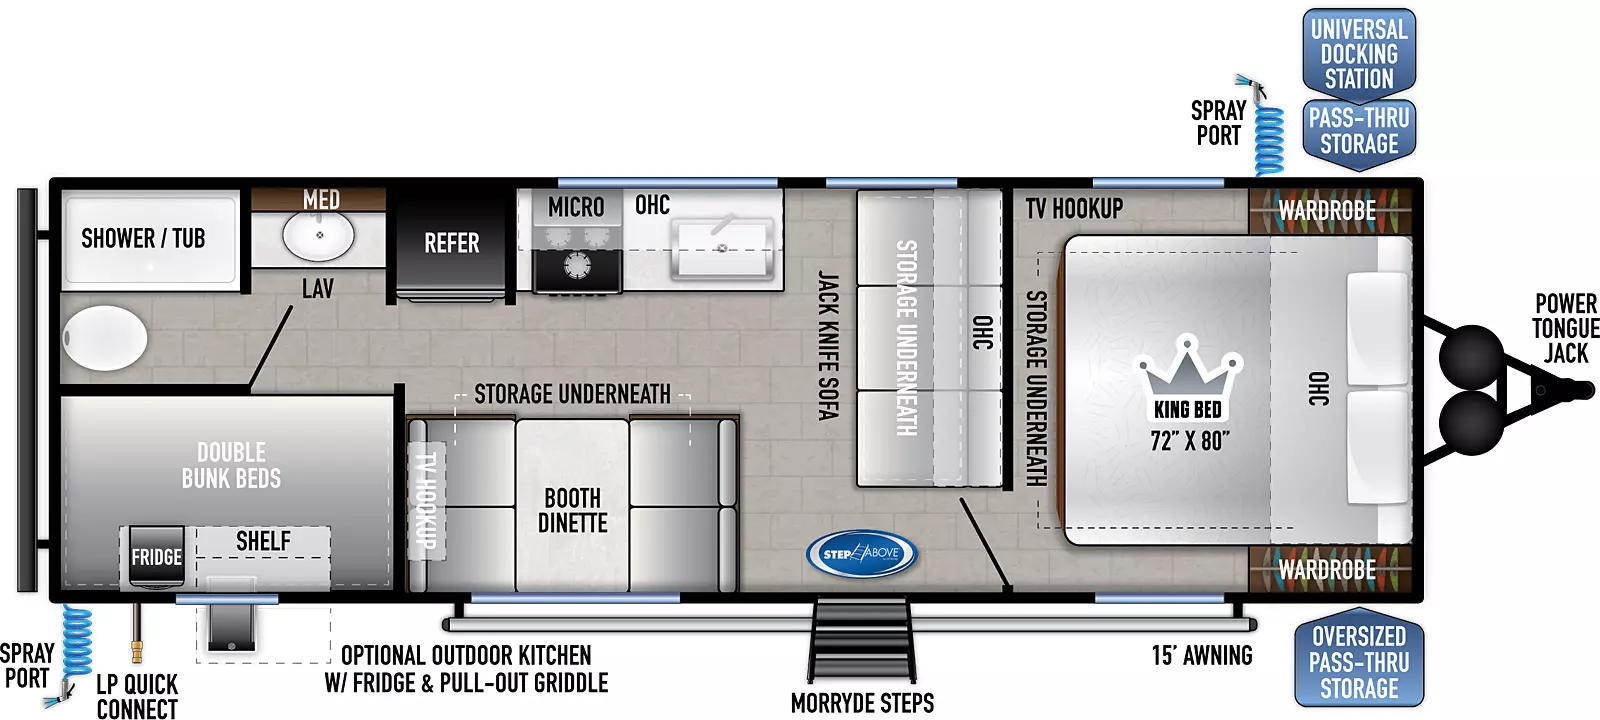 The 27KNS has zero slides and one entry door on the door side. Interior layout from front to back: front bedroom with king bed featuring overhead cabinets, bedside wards, TV hookup, underbed storage and solid privacy door; kitchen living dining area with jackknife sofa that butts up against front bedroom, booth dinette with storage underneath featuring picture window on door side, residential sink, kitchen counter with 3-burner cooktop, oven, overhead microwave and cabinets plus refrigerator on off-door side; the rear includes bathroom in off-door side corner inclusive of sink with overhead medicine cabinet, shower/tub, porcelain toilet, and double bunk beds in door side corner. Exterior from front to back: Power tongue jack, oversized pass-thru storage on door side, universal docking station in pass-thru on off-door side with spray port; solid steps at entry door on door side, LP quick connect in door side rear, spray port and 15' awning. 